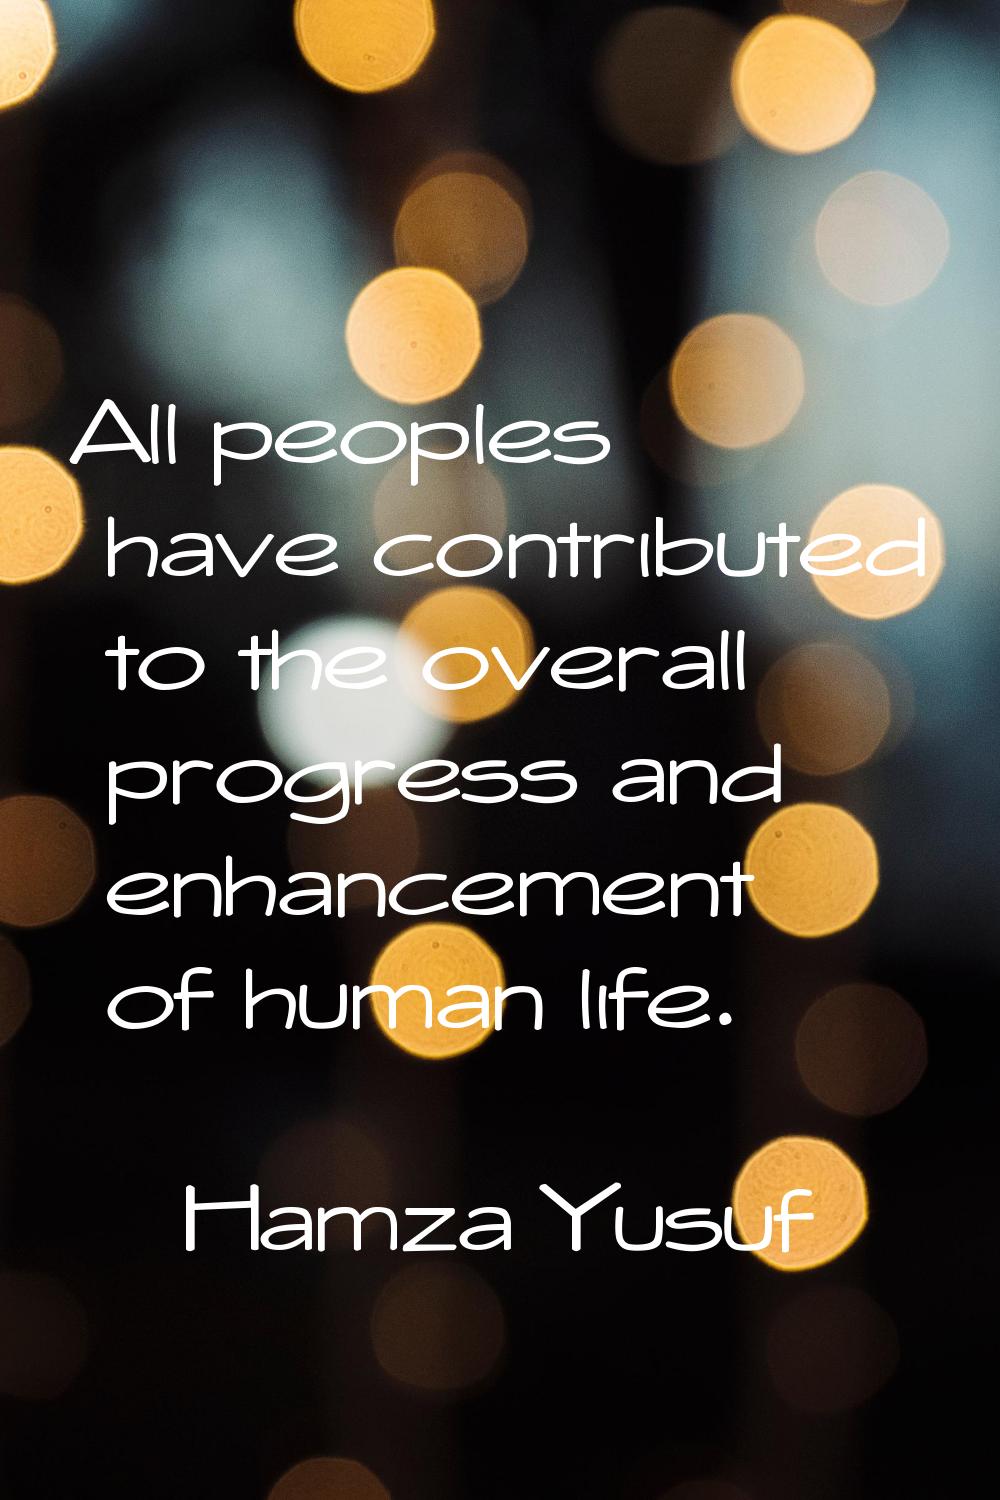 All peoples have contributed to the overall progress and enhancement of human life.